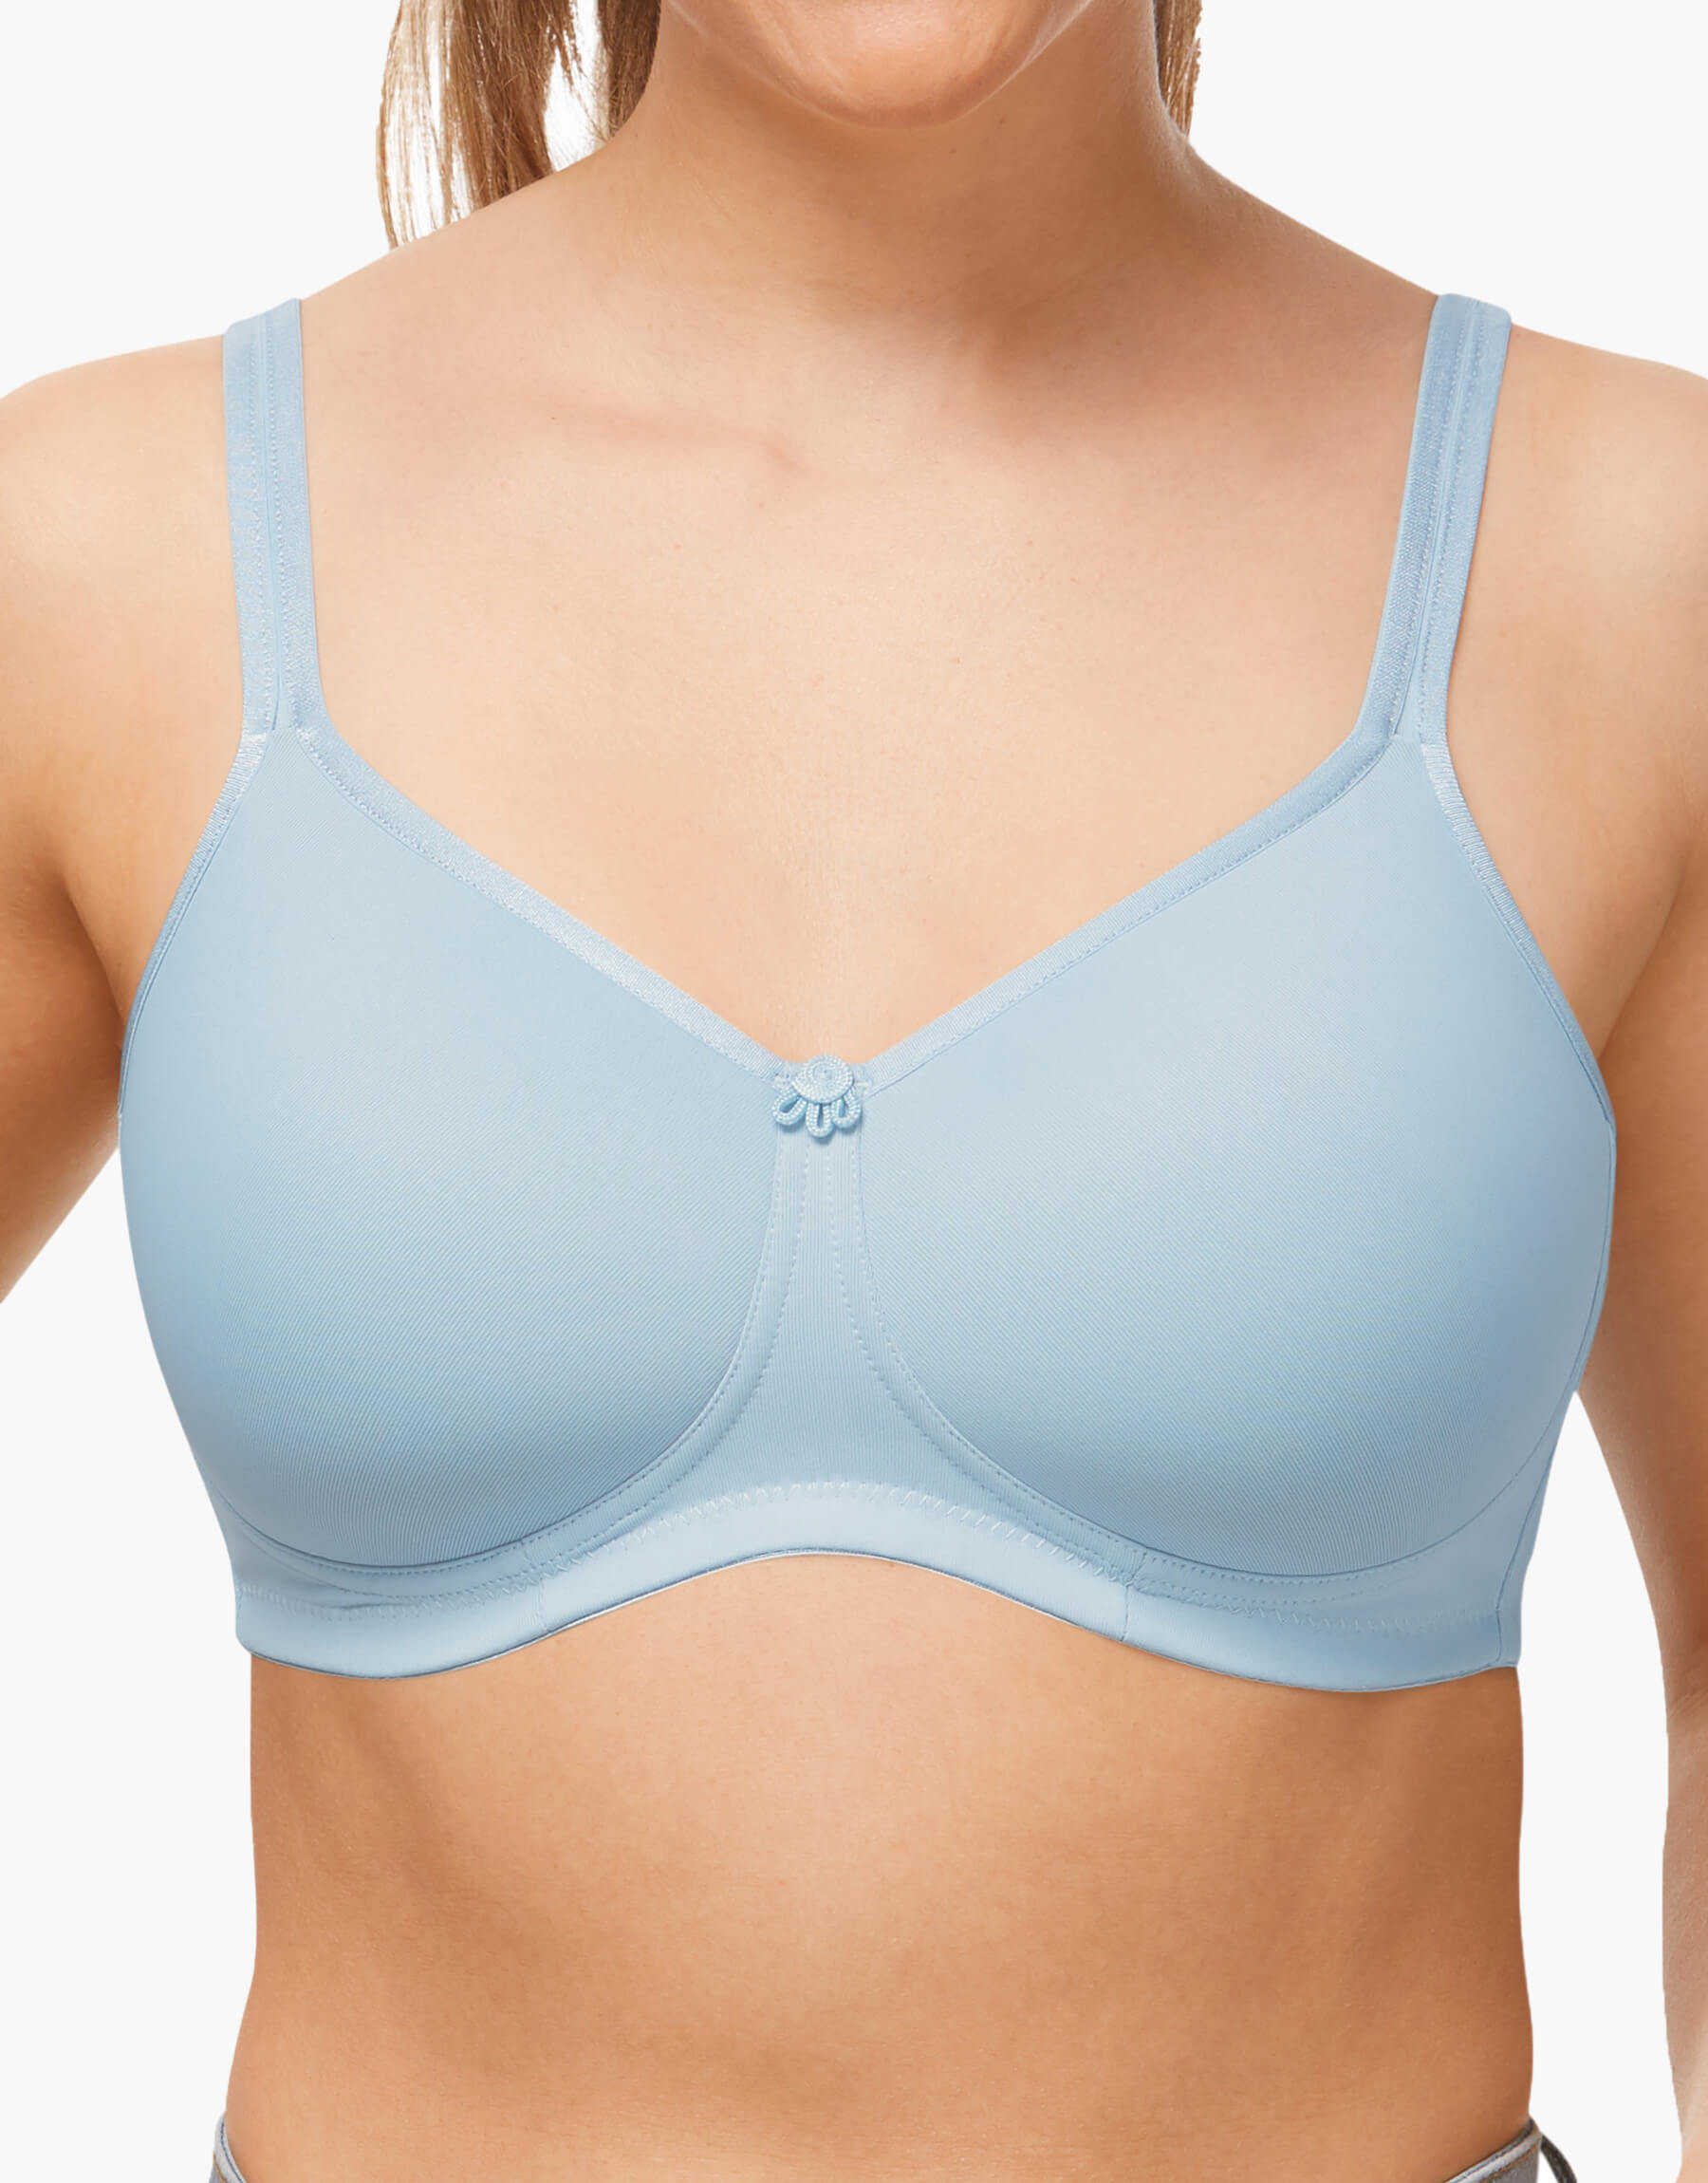 Amoena Mastectomy Bra - New!! - 83% Cotton - Sold out!